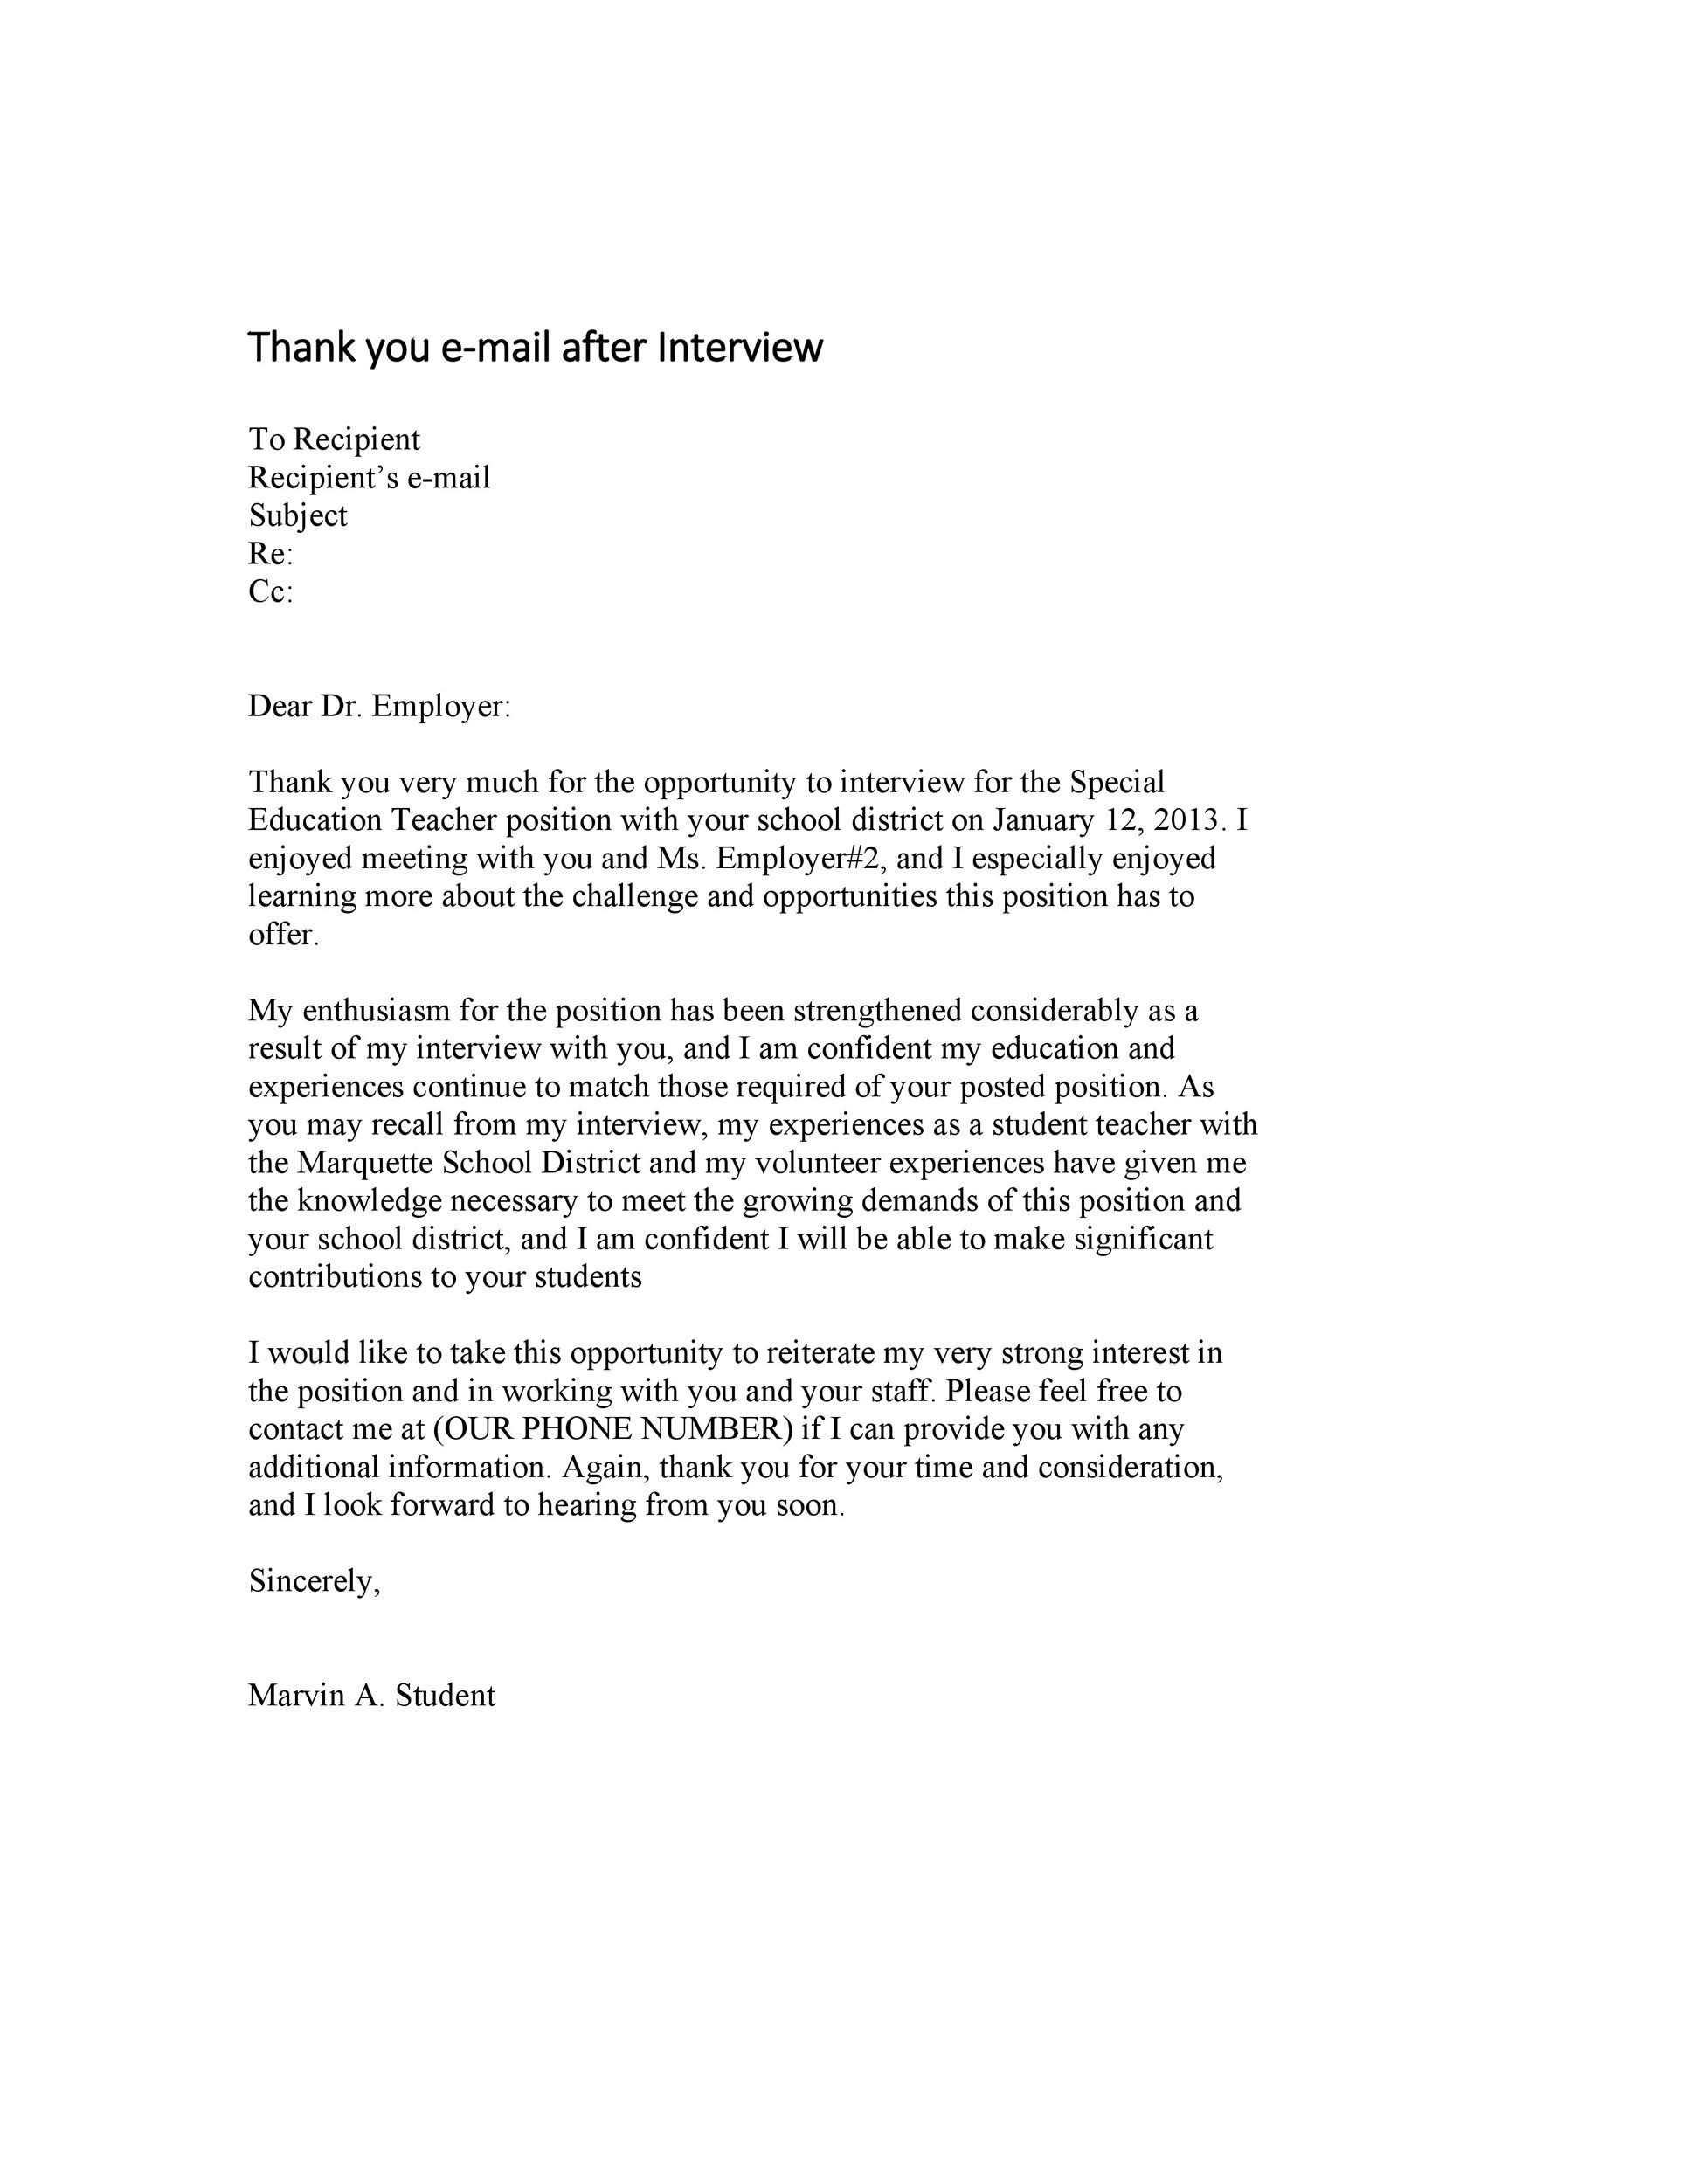 Free Thank you e-mail after Interview Template 34